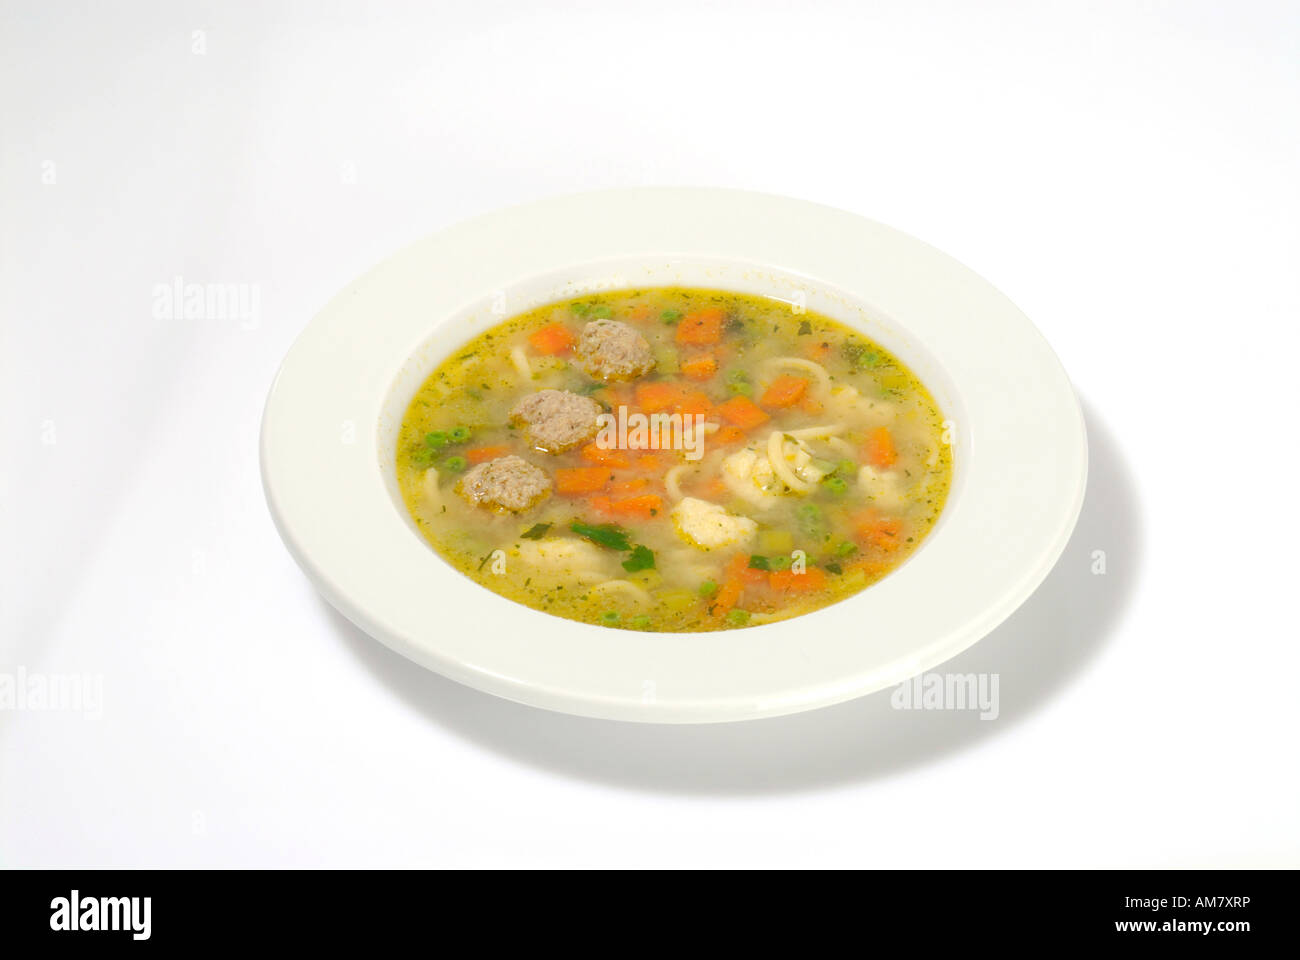 Plate with noodle soup Stock Photo